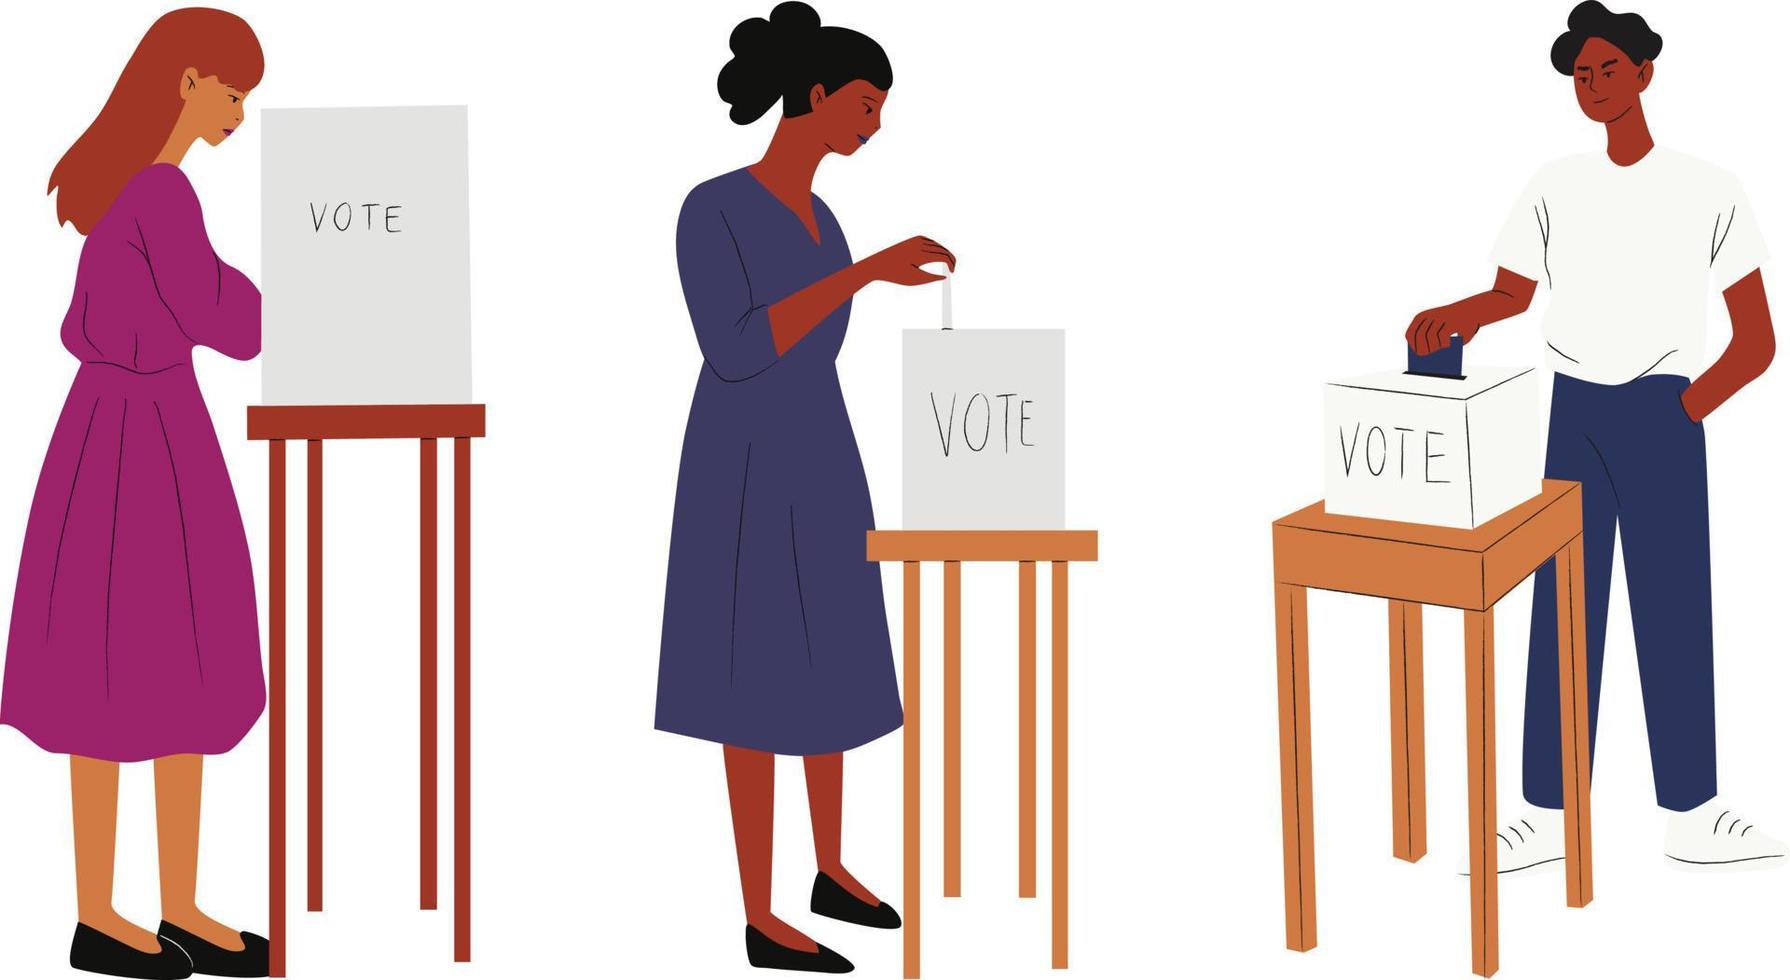 People voting in elections. Male and female candidates. Vector illustration.